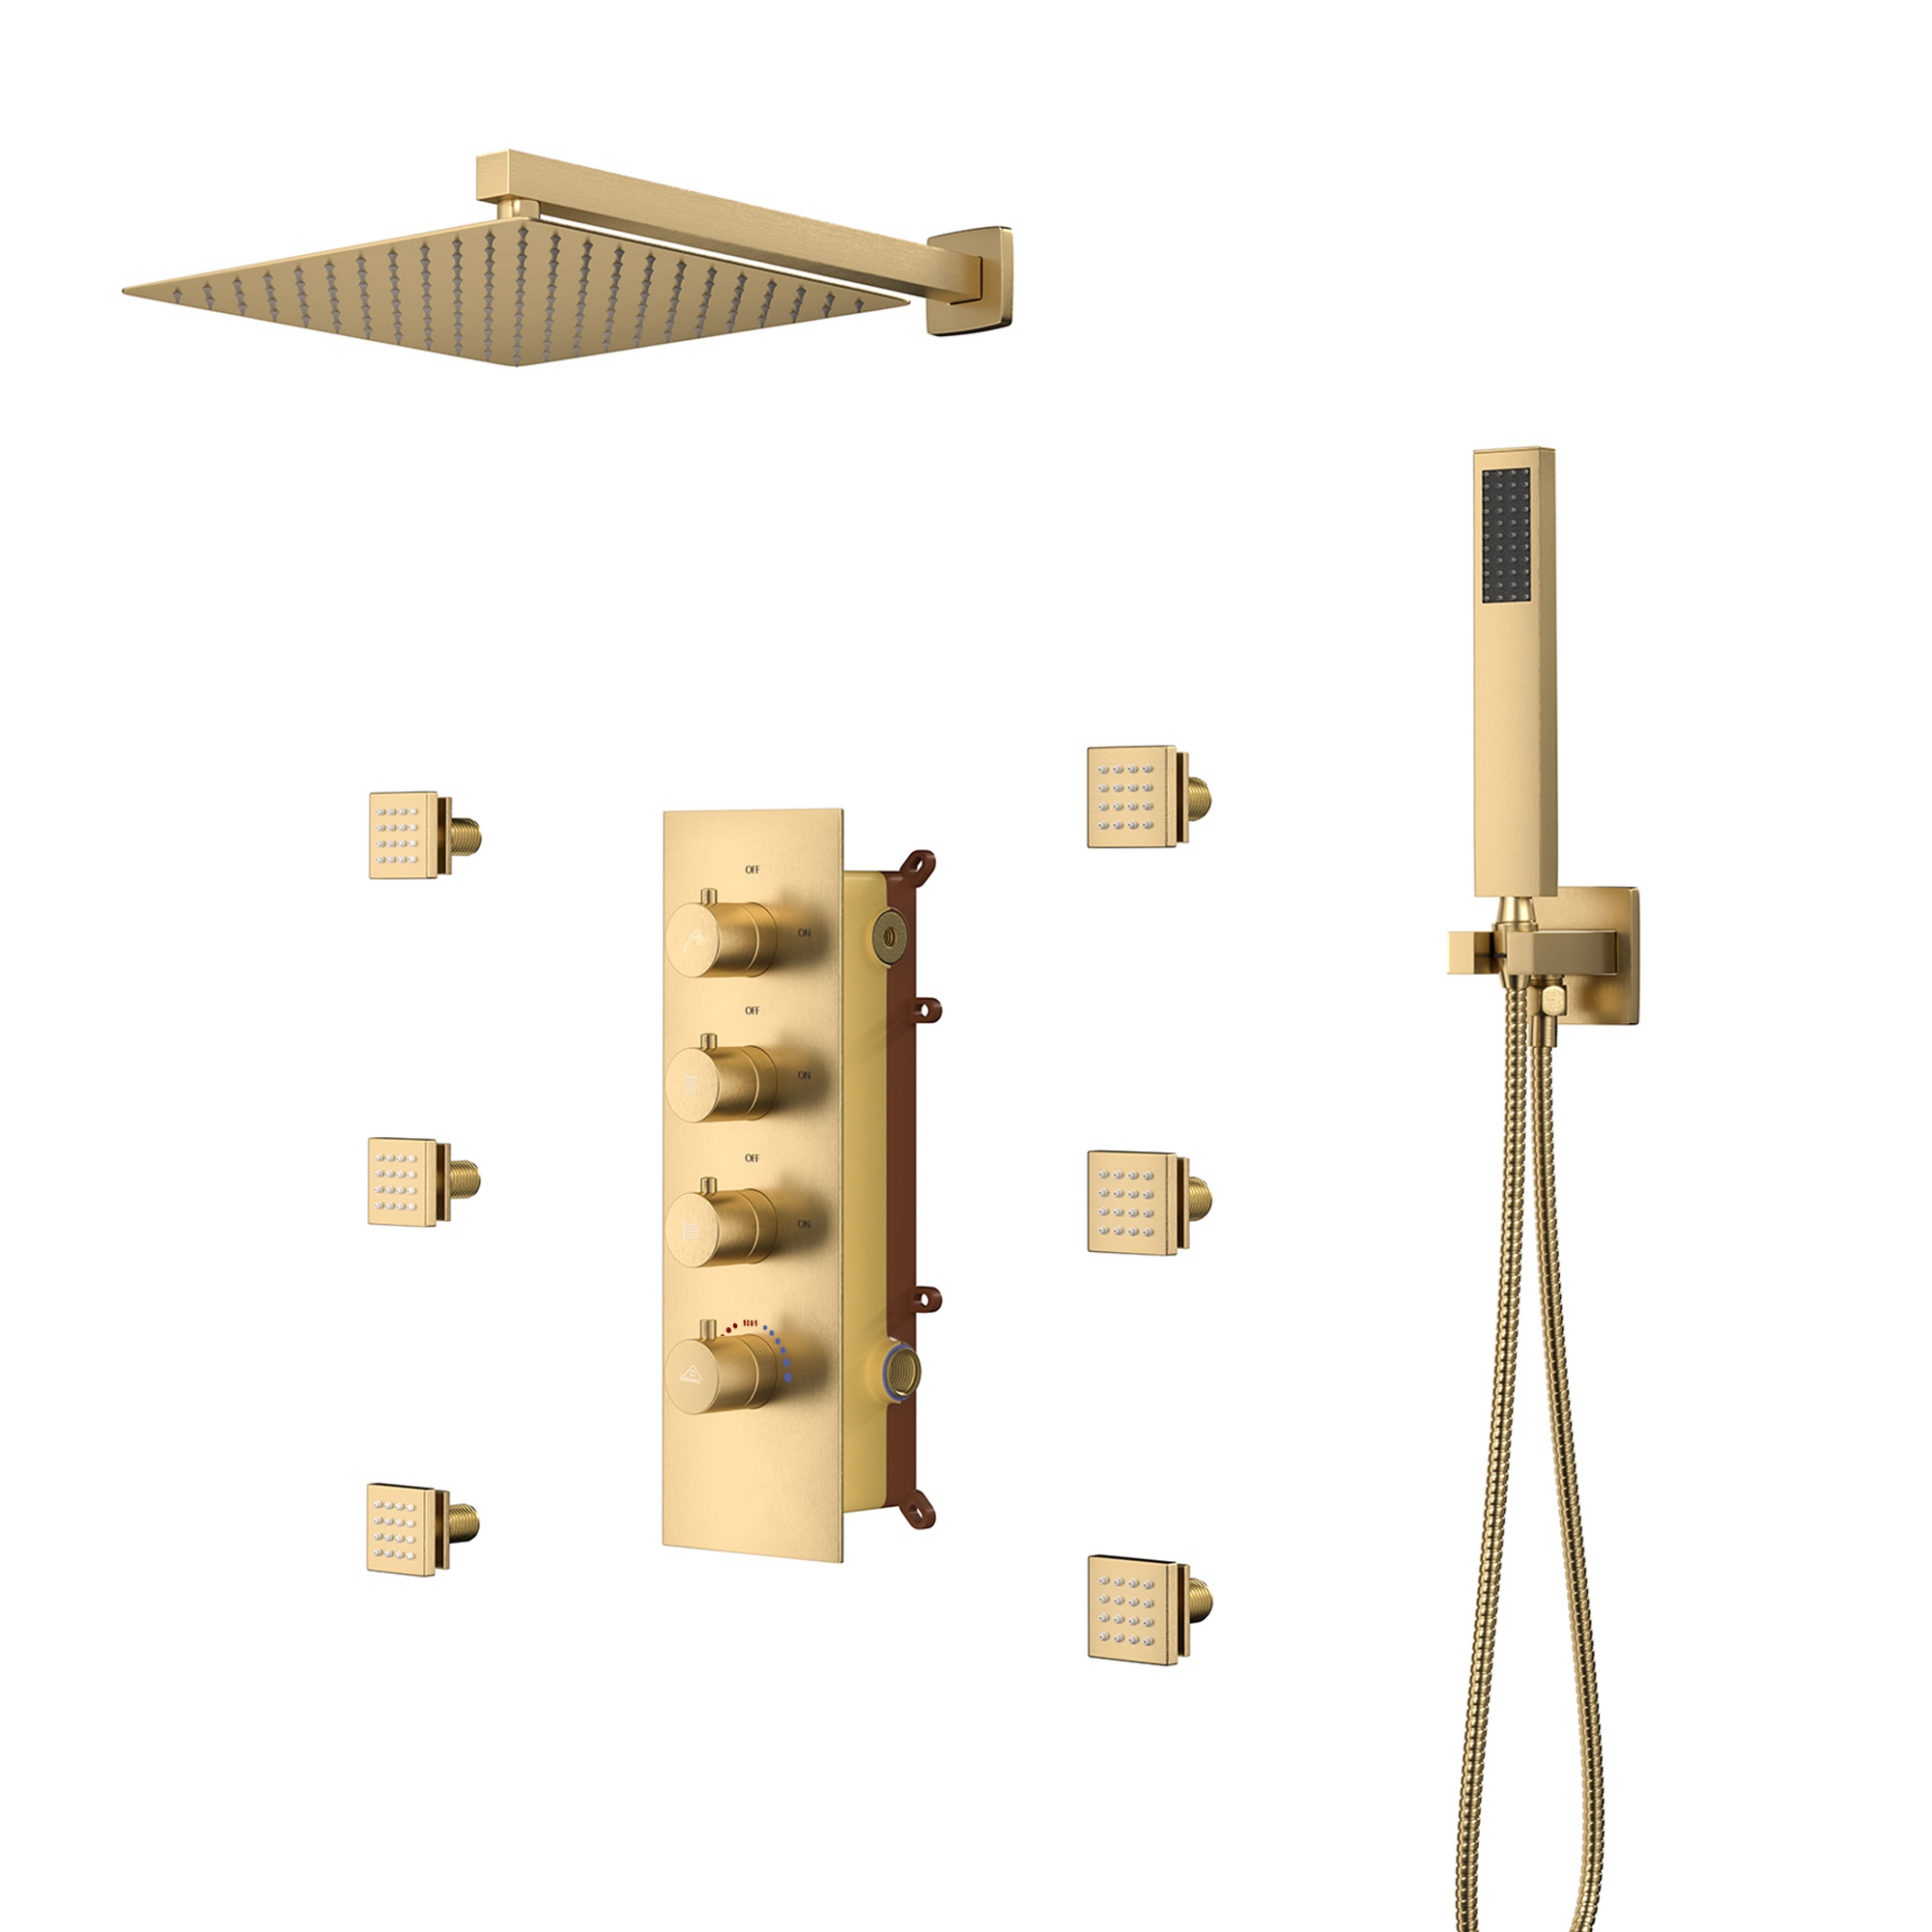 12 in. Thermostatic Wall Mounted Rainfall Shower Faucet Dual Shower Heads System With 6 Body Jets, bronze tones